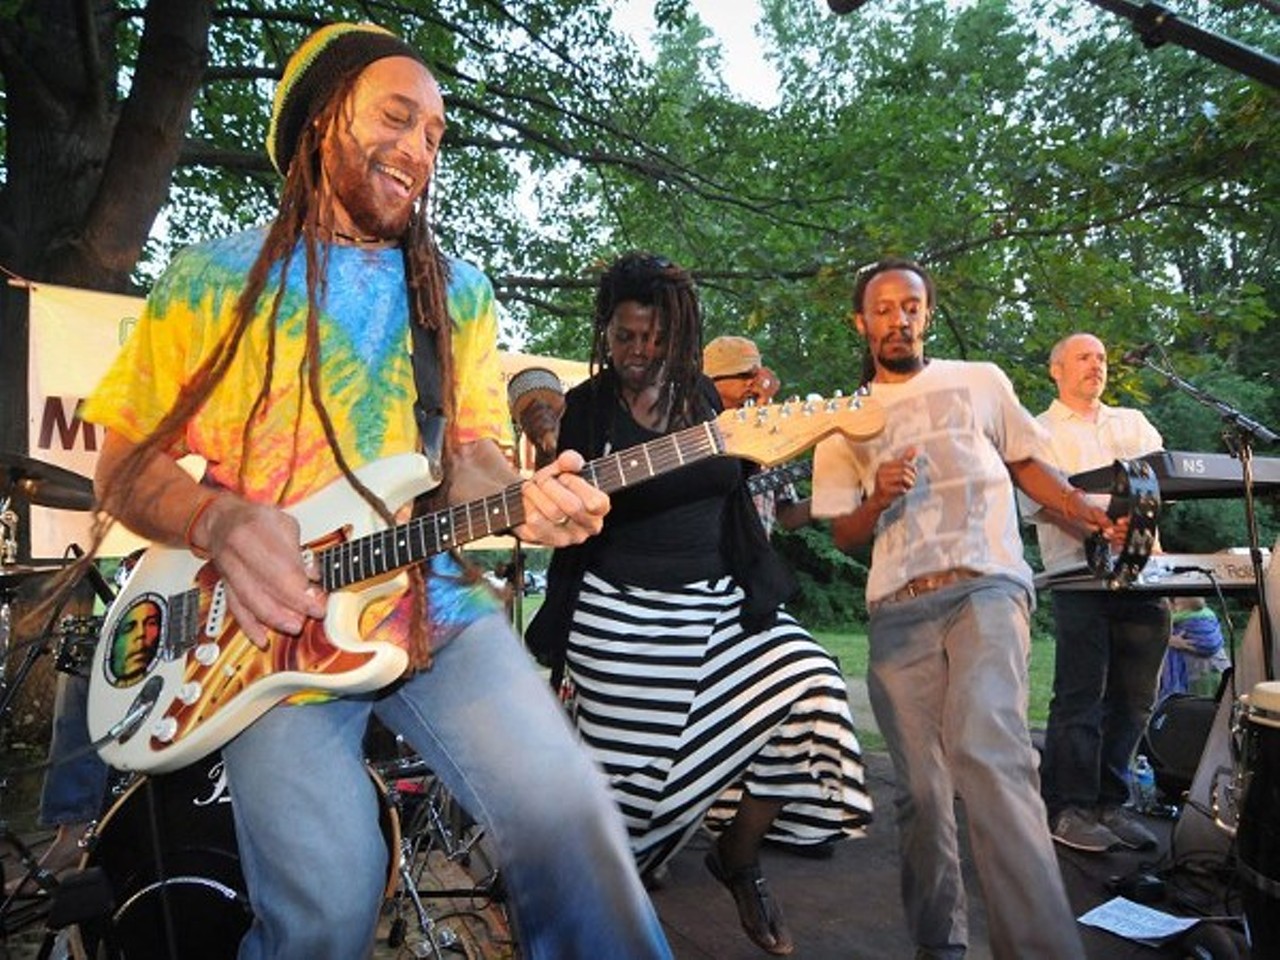  Cuyahoga Valley National Park Summer Concert Series 
Wed, June 6
Photo by Mark Mindlin